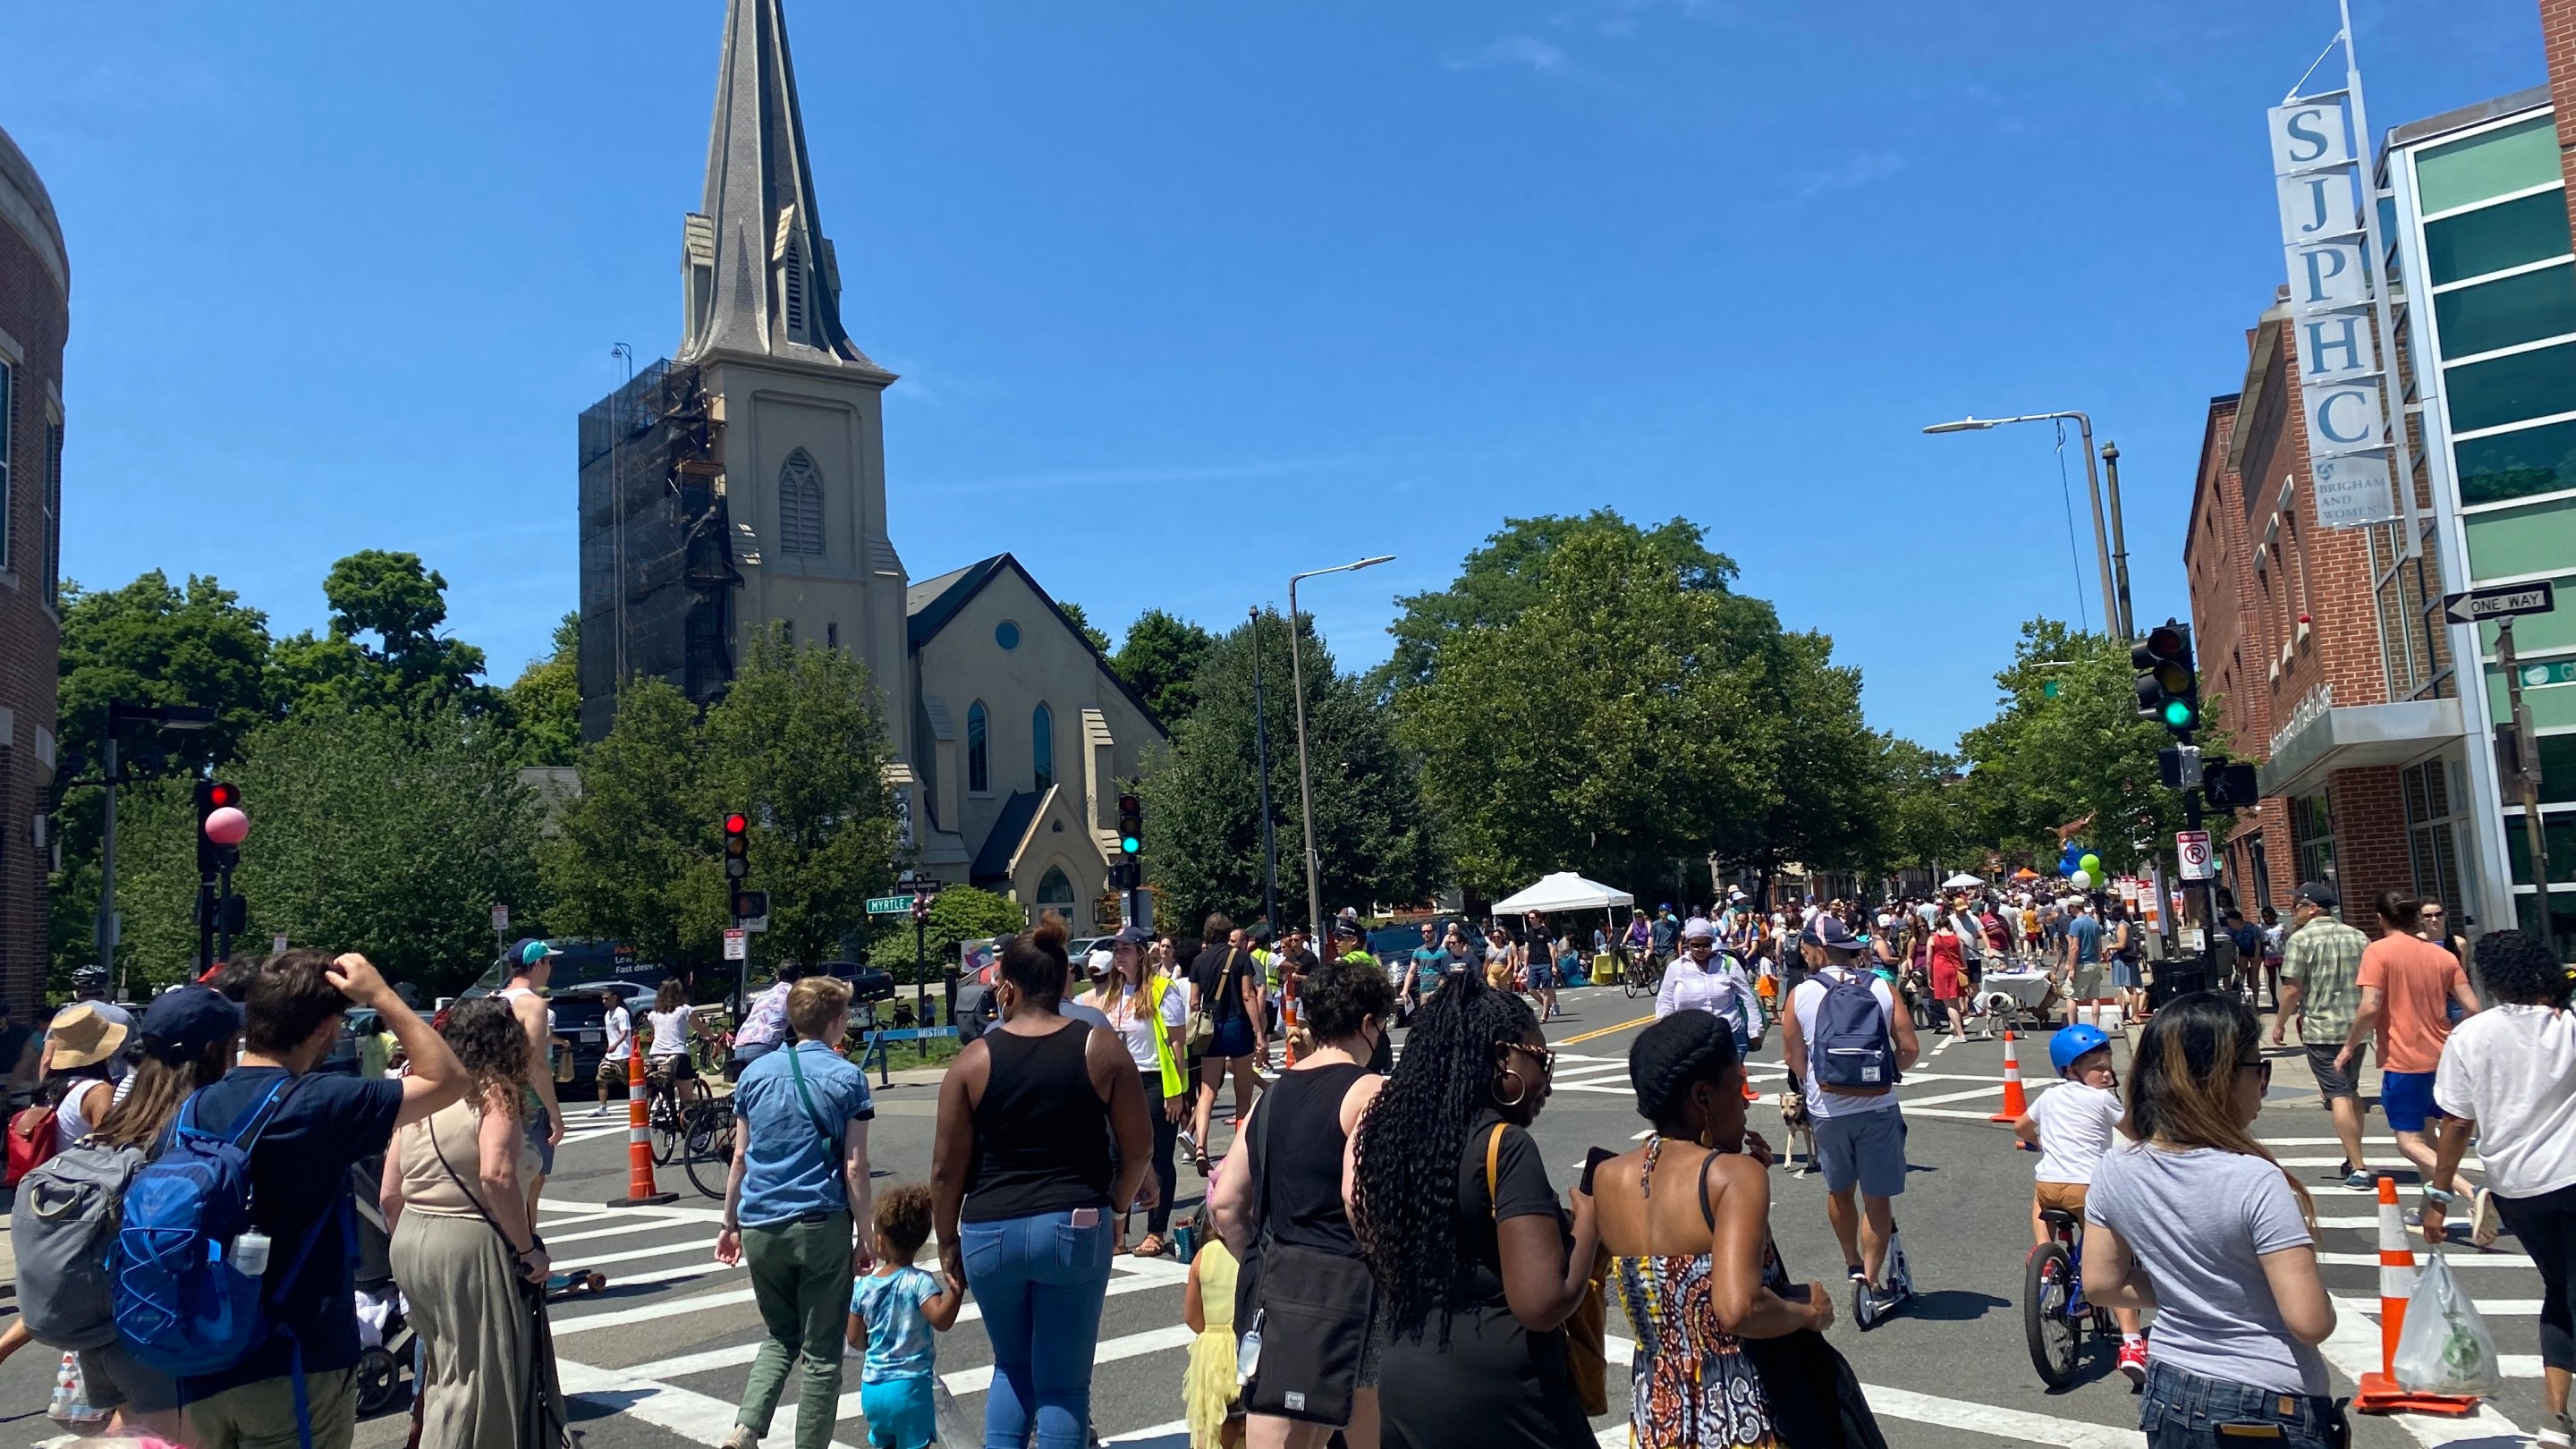 A large crowd of people walking and biking fills an intersection in front of a large church steeple.